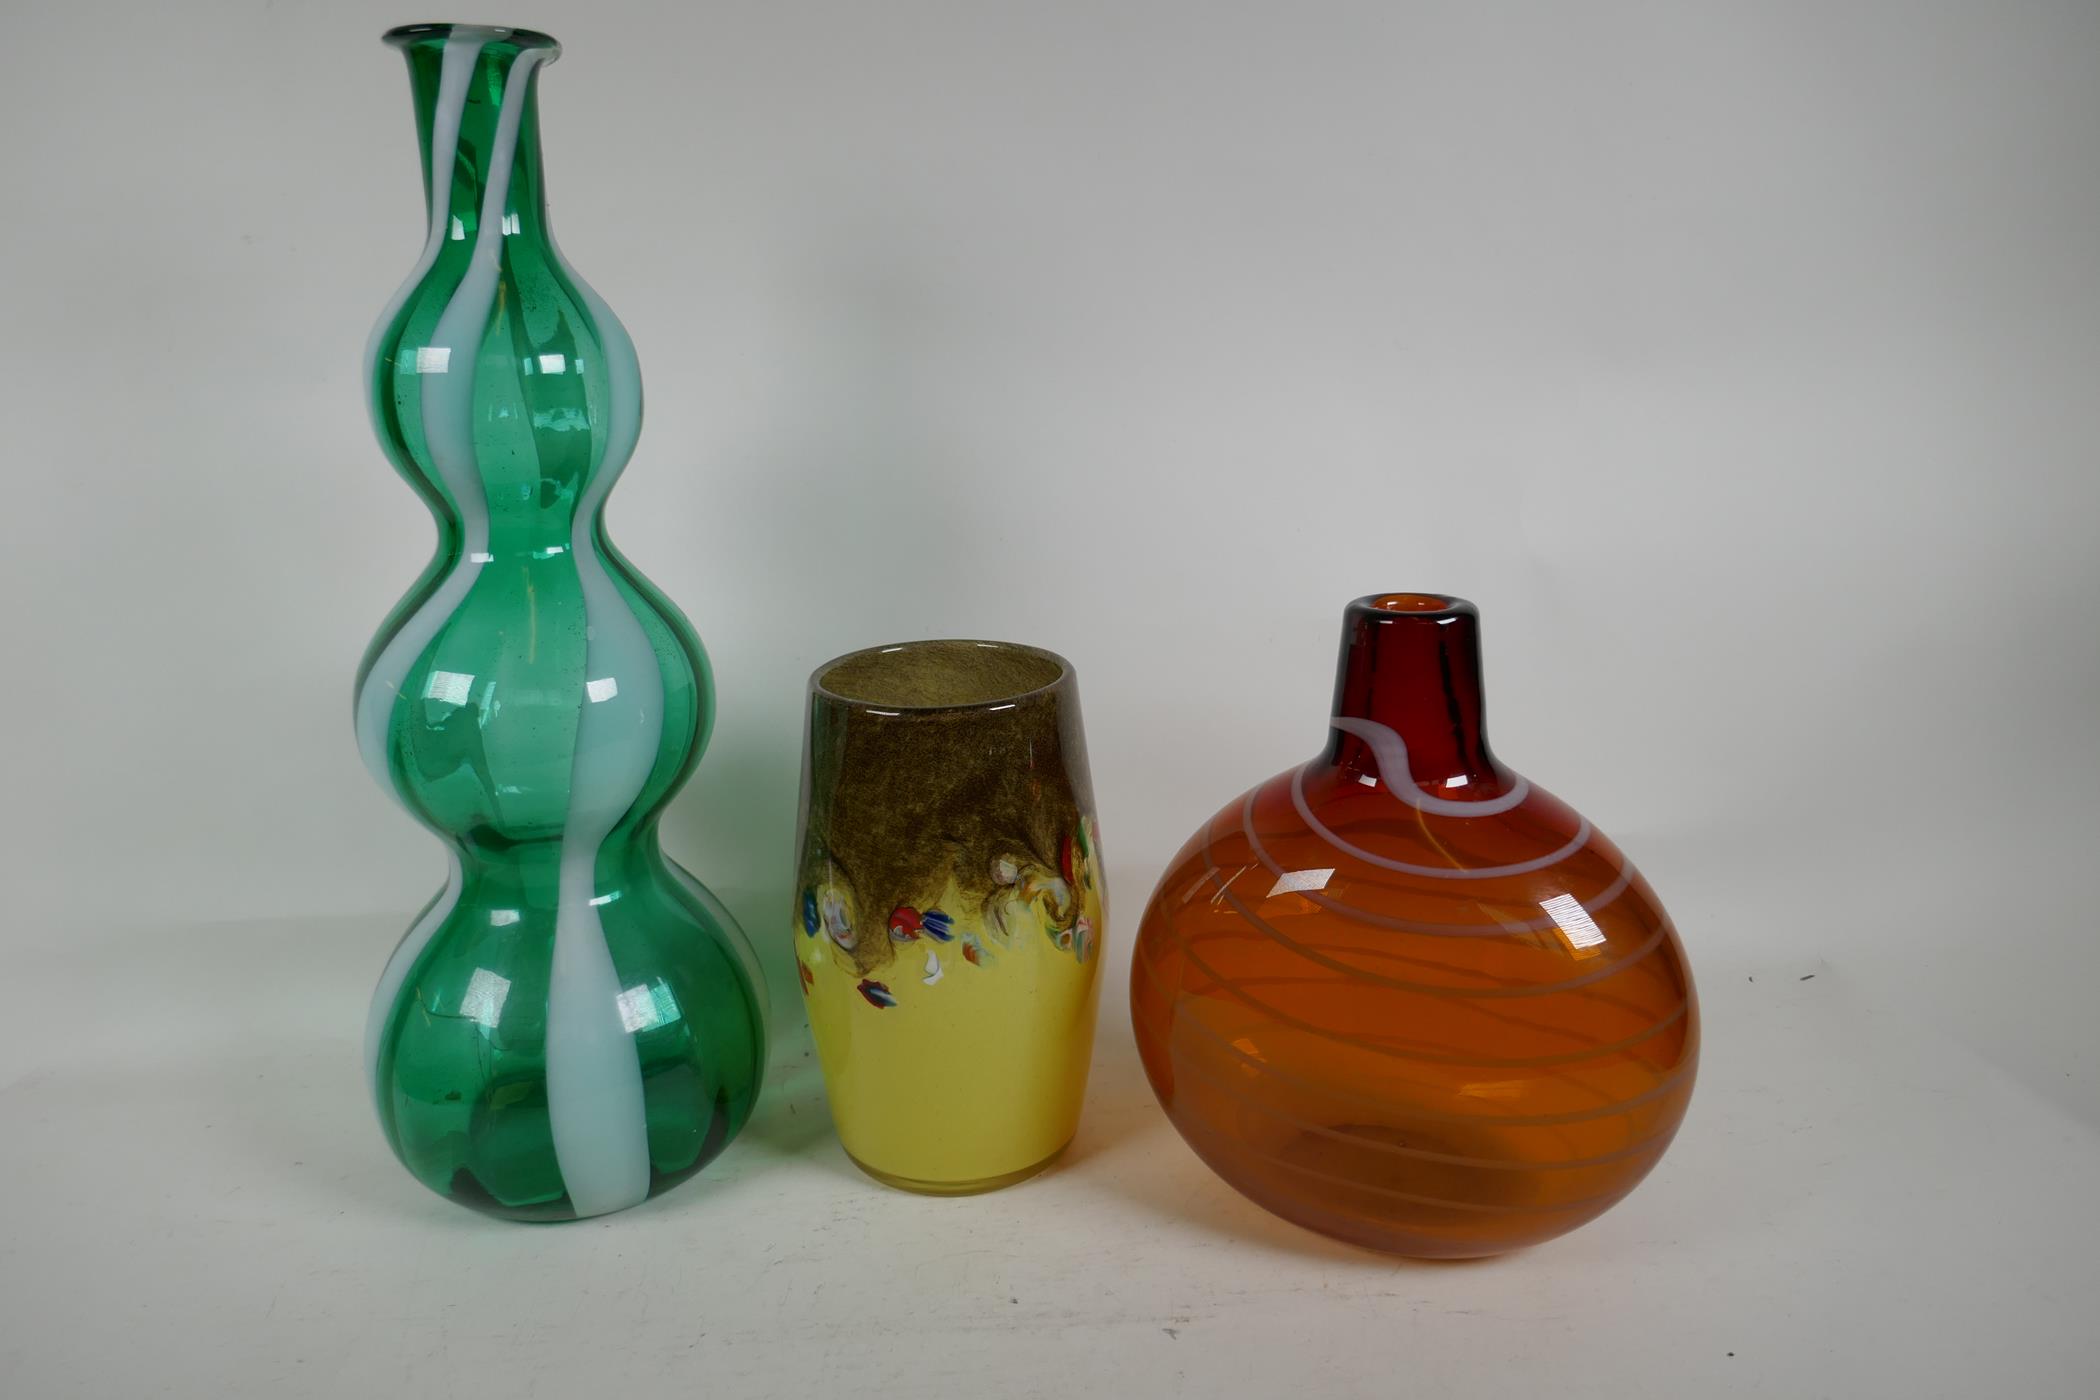 A Murano triple gourd green and white glass vase, 16" high, together with a Strathern studio glass